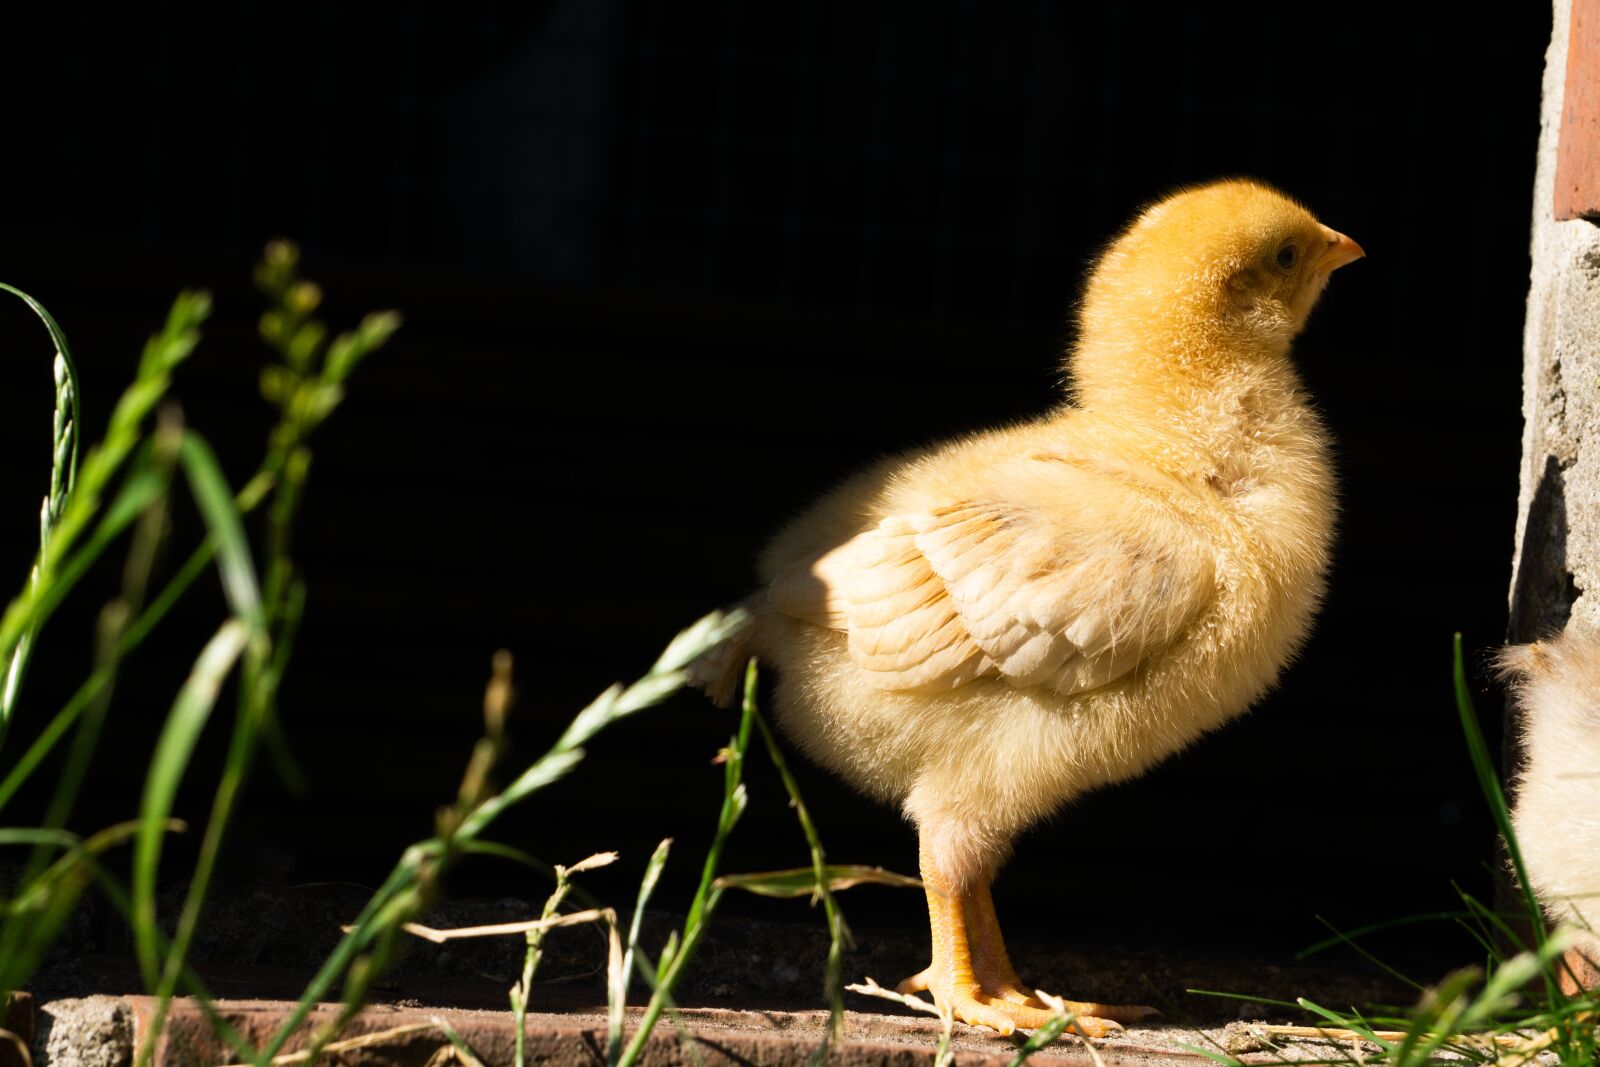 Sony a6000 sample photo. Chick, small, young photography